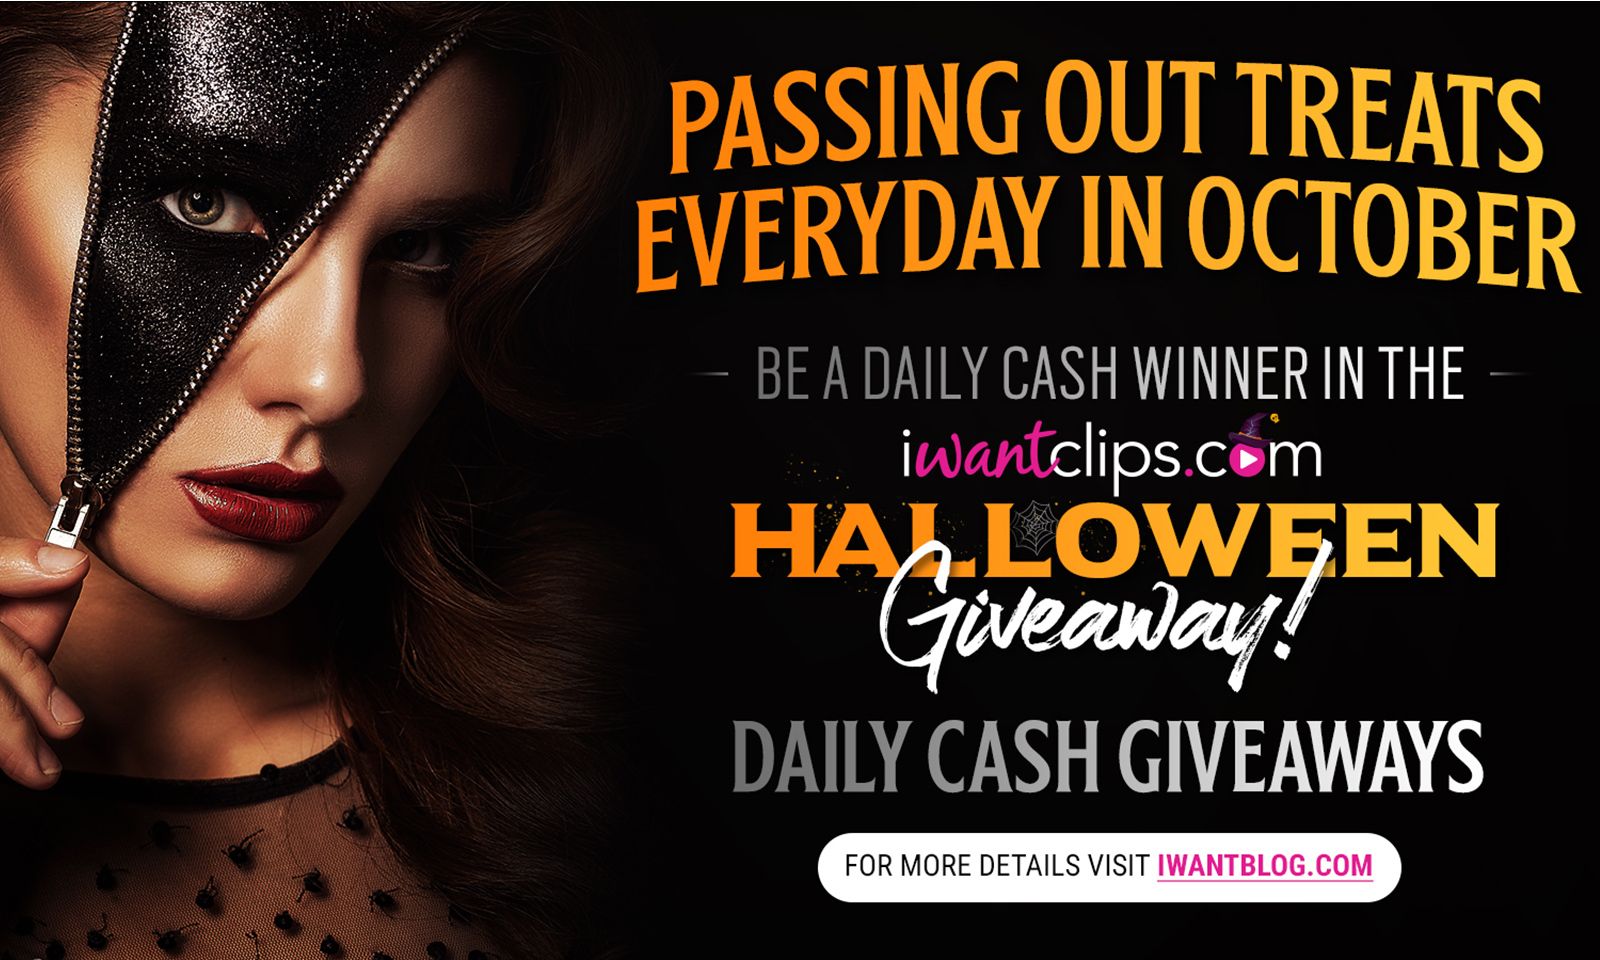 iWantClips Mounts Halloween-Themed Daily Cash Contest